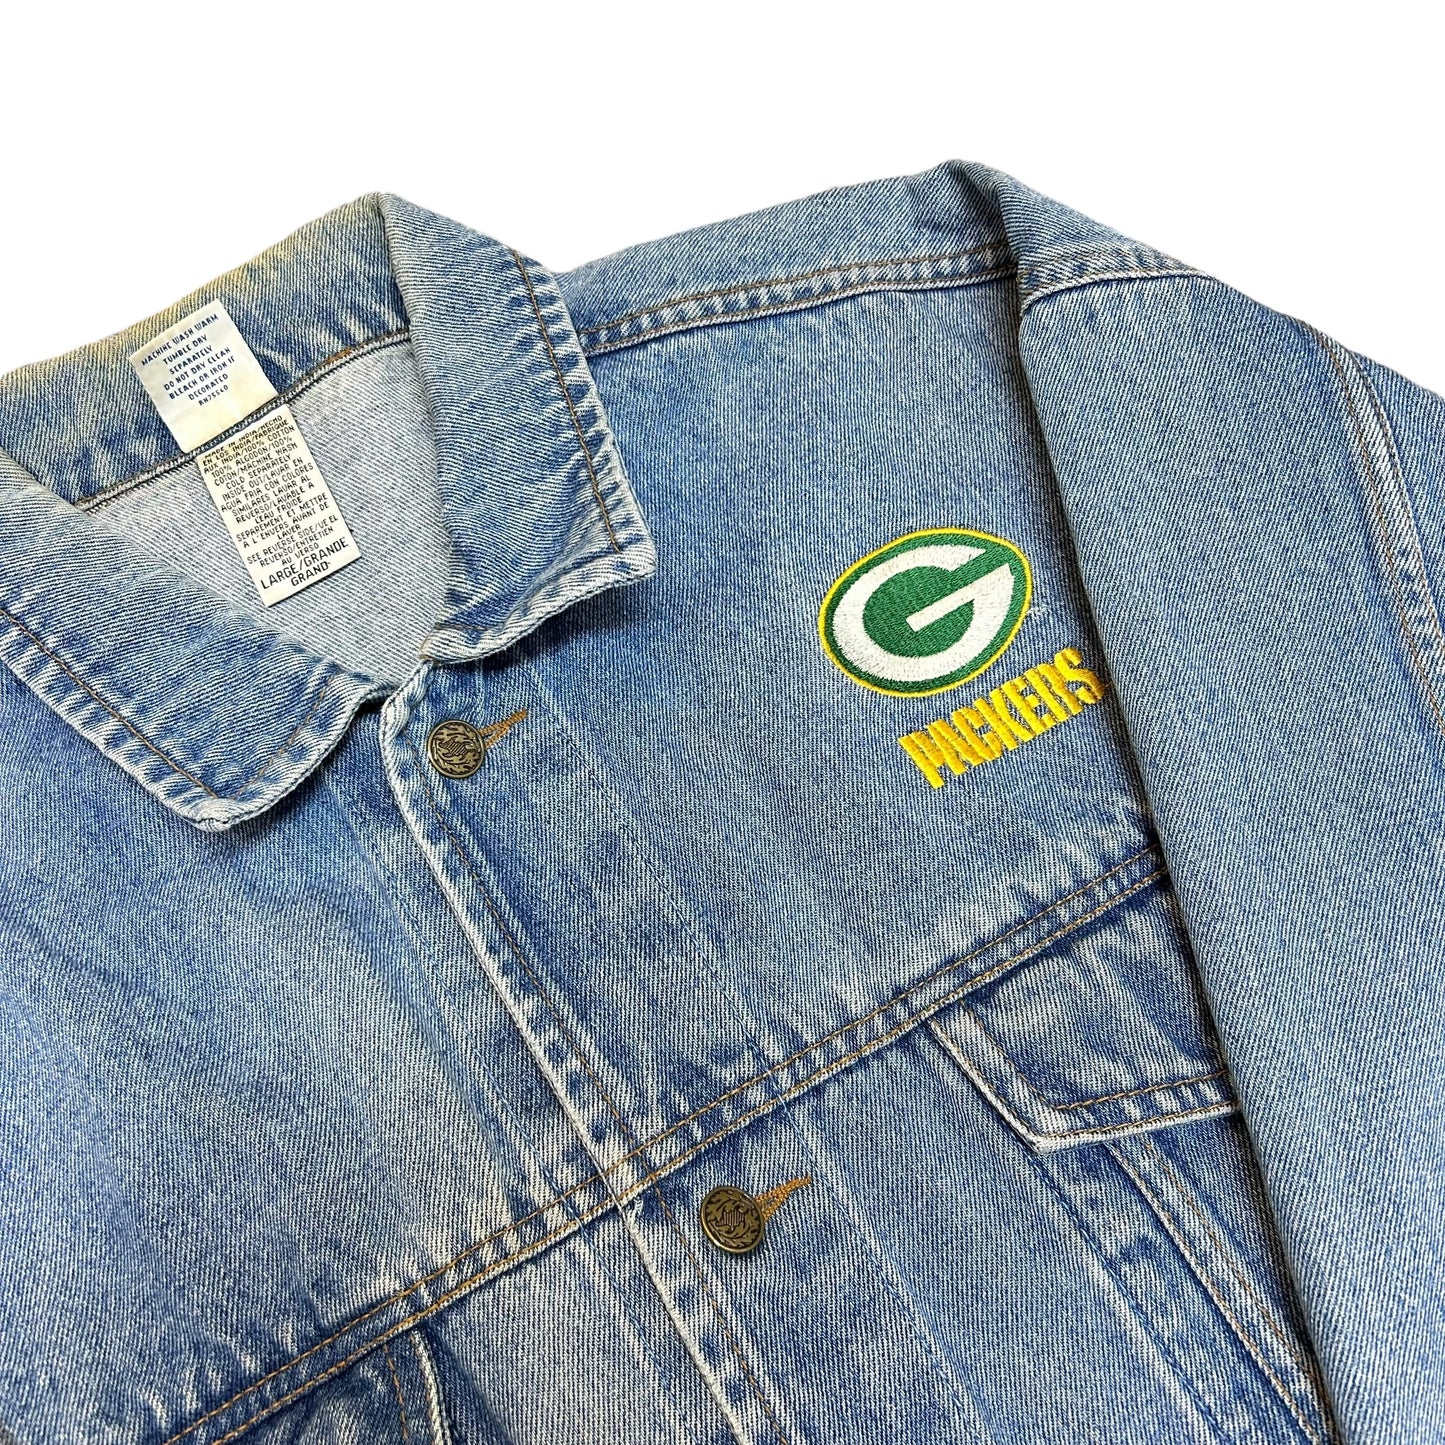 Vintage 1990s “Ultimate Sports Wear” Green Bay Packers Embroidered Denim Jacket - Size Large